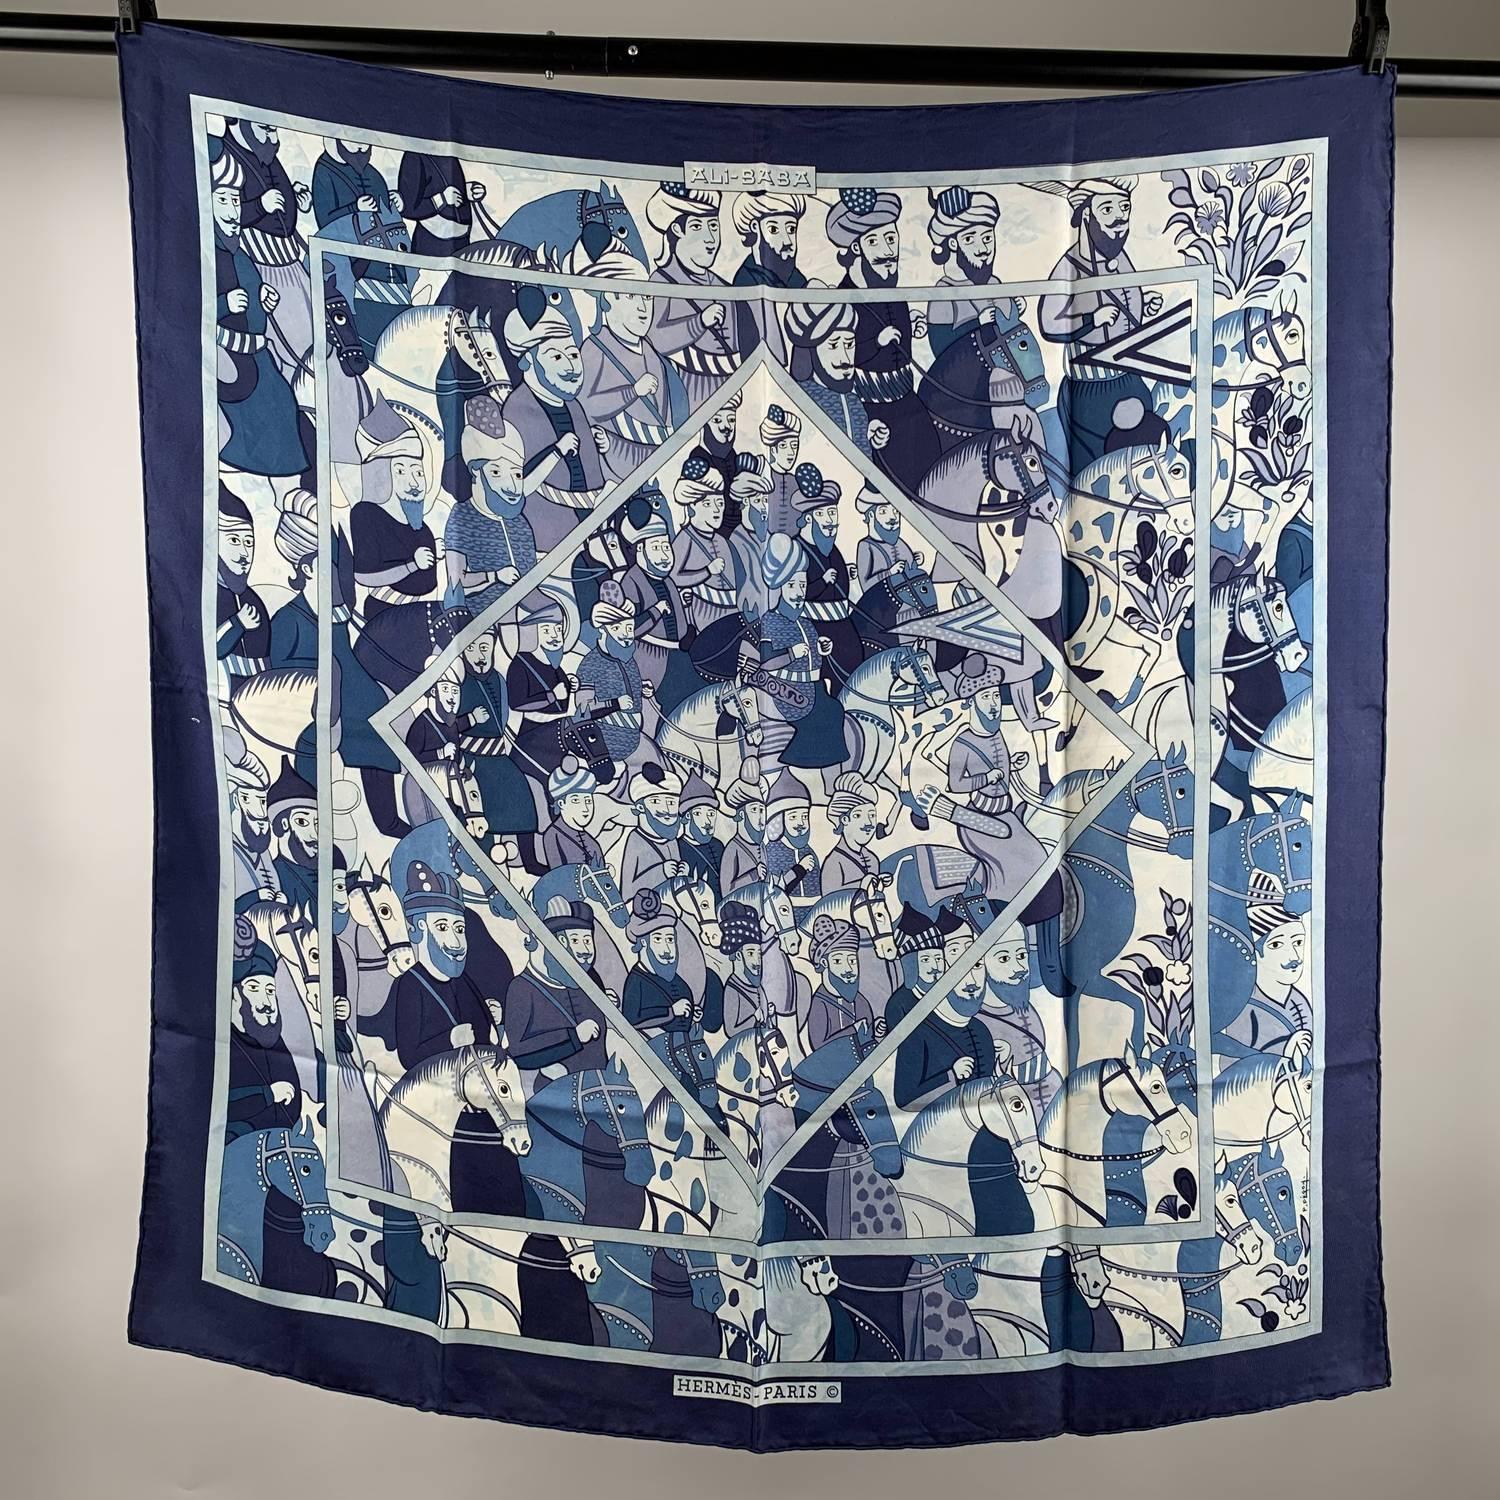 MATERIAL: Silk COLOR: Blue MODEL: Scarf GENDER: Women SIZE: 35 x 34 inches - 88,9 x 86,3 cm COUNTRY OF MANUFACTURE: France Condition CONDITION DETAILS: C: FAIR CONDITION - Well used, with noticeable defects -Some transfer of blue color due to use, a